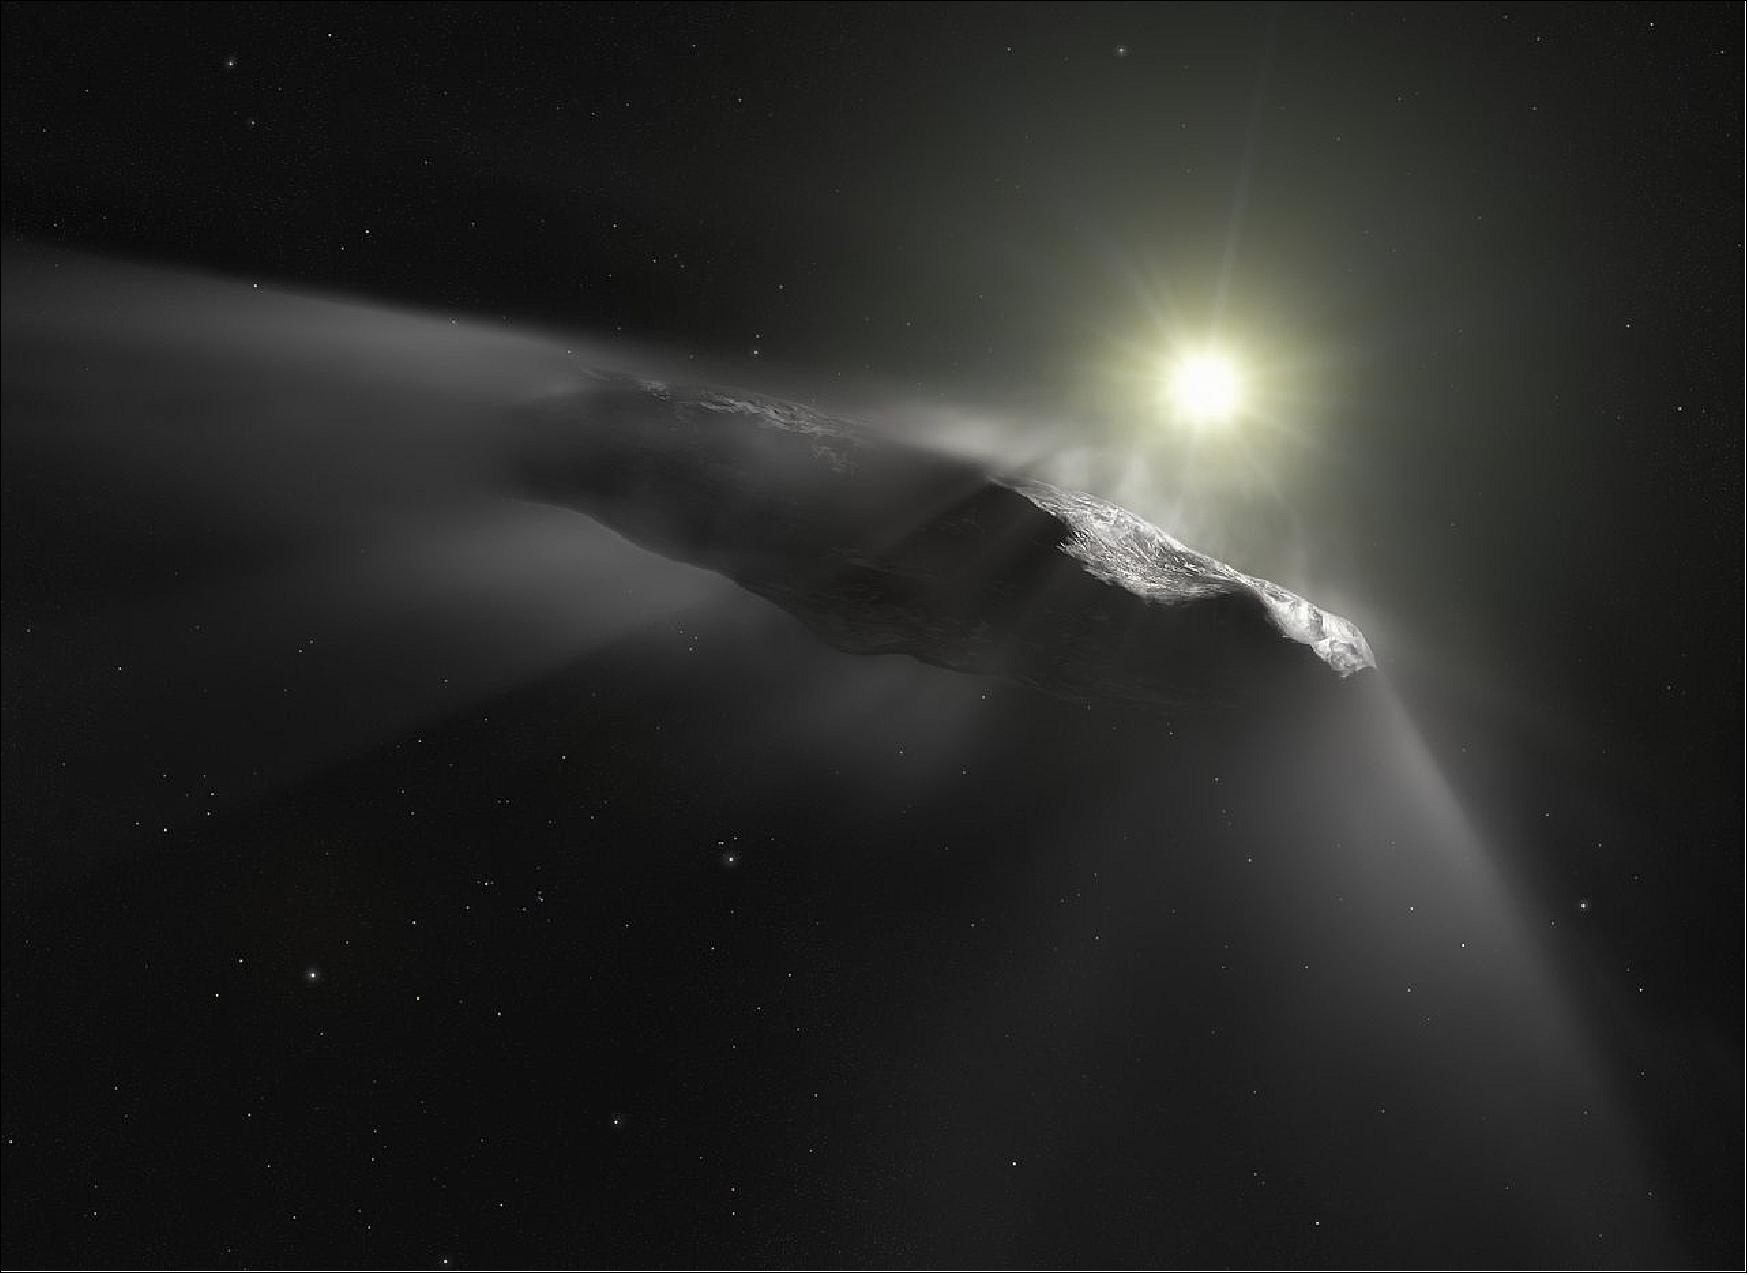 Figure 37: Artist impression of the interstellar object ‘Oumuamua. Observations since its discovery in 2017 show that the object is slightly deviating from the trajectory it would be following if it were only influenced by the gravity of the Sun and the planets. Researchers assume that venting material from its surface due to solar heating is responsible for this behavior. This outgassing can be seen in this artist's impression as a subtle cloud being ejected from the side of the object facing the Sun (image credit: ESA/Hubble, NASA, ESO, M. Kornmesser)